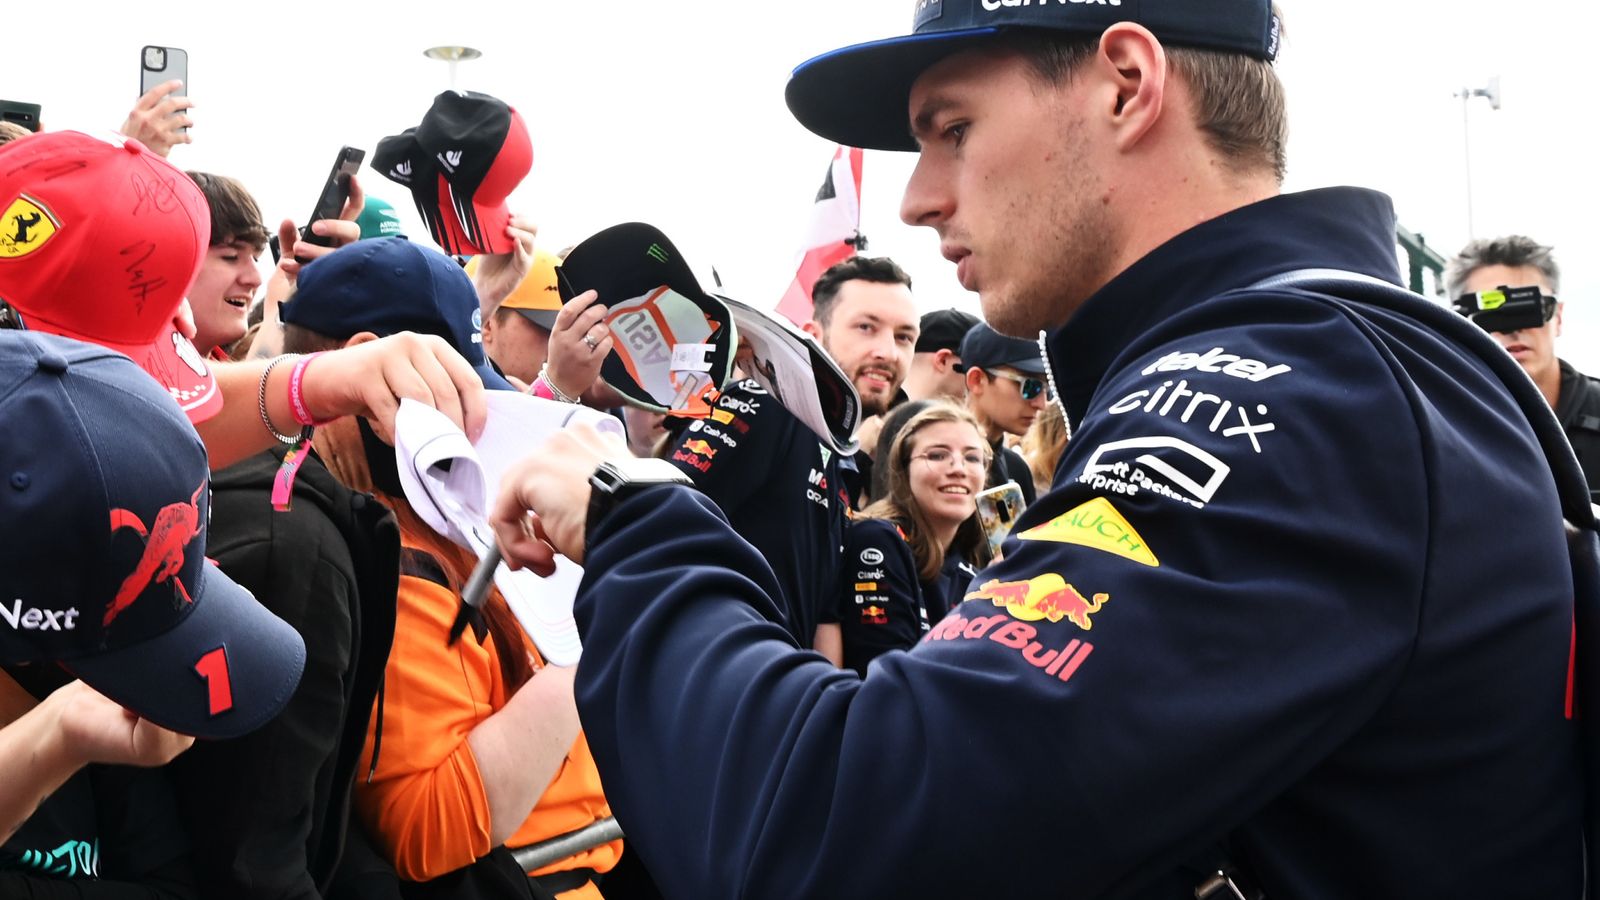 Red Bull boss Christian Horner says Max Verstappen 'accepts' British GP boos, and explains silence after Nelson Piquet's comments